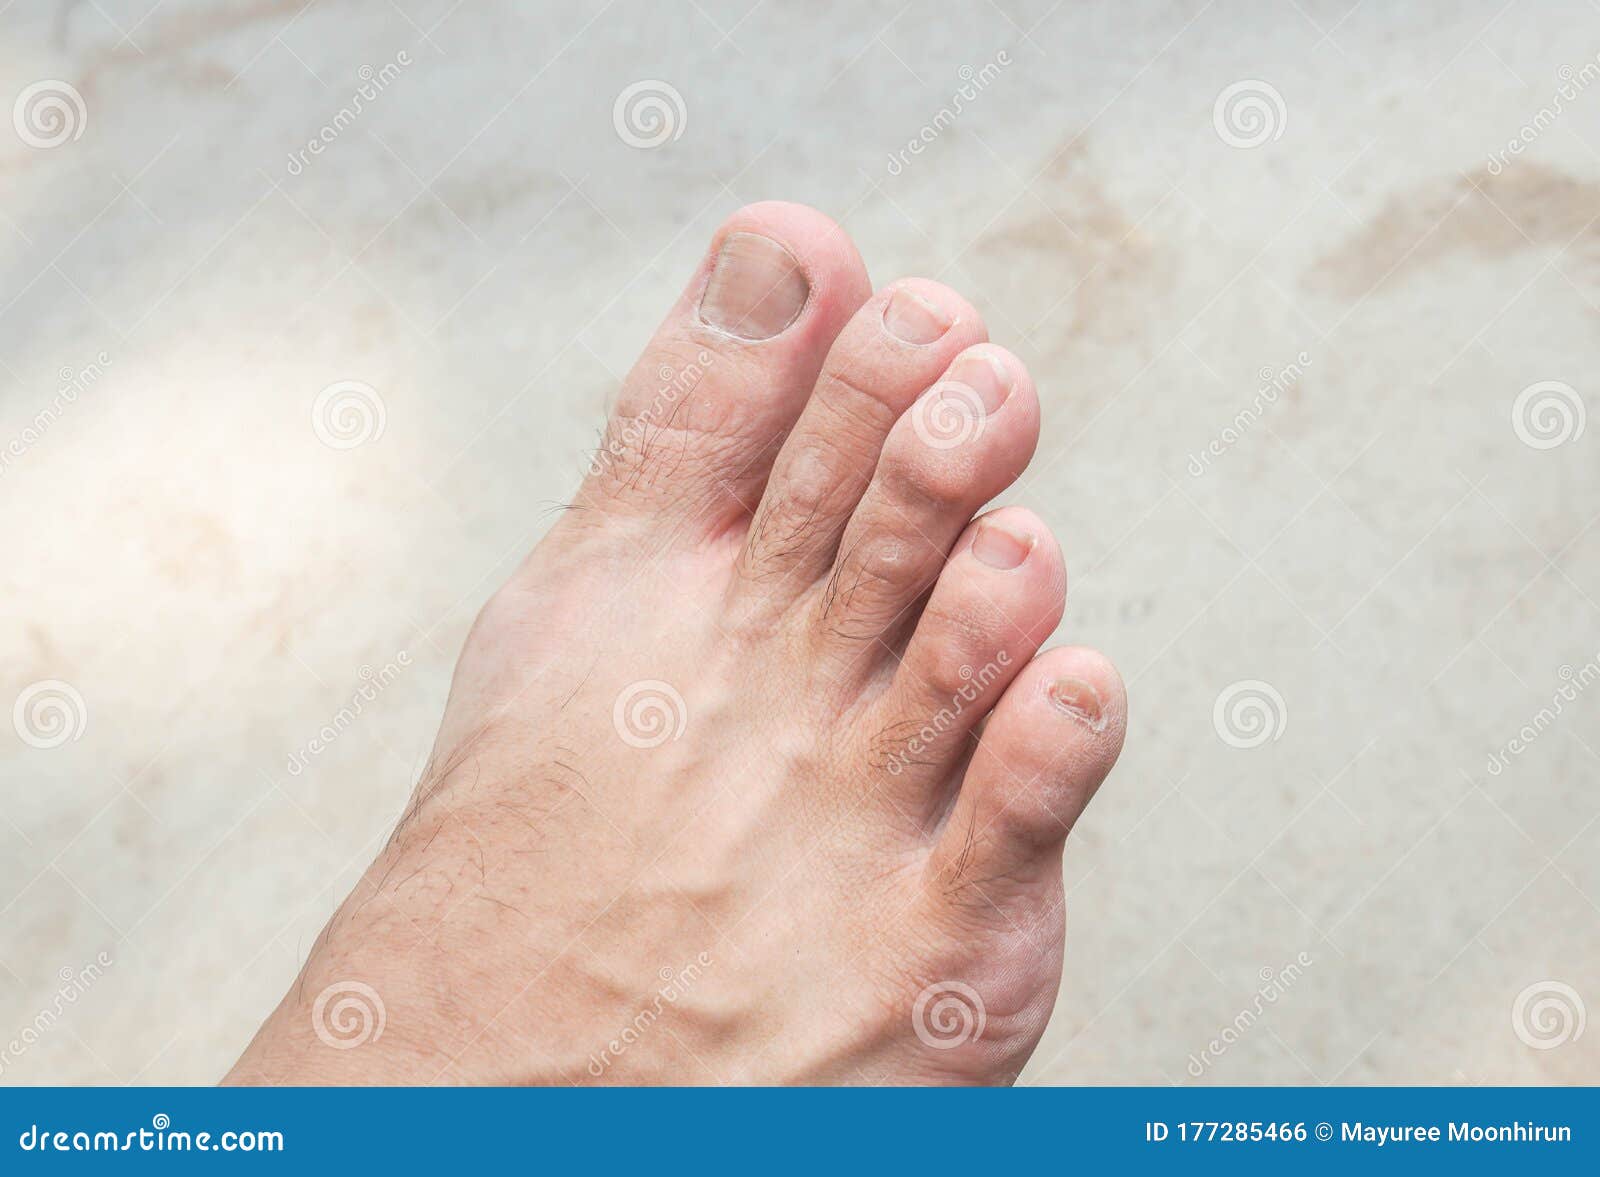 Types of Toenail Fungus: Pictures, Symptoms, and Treatment